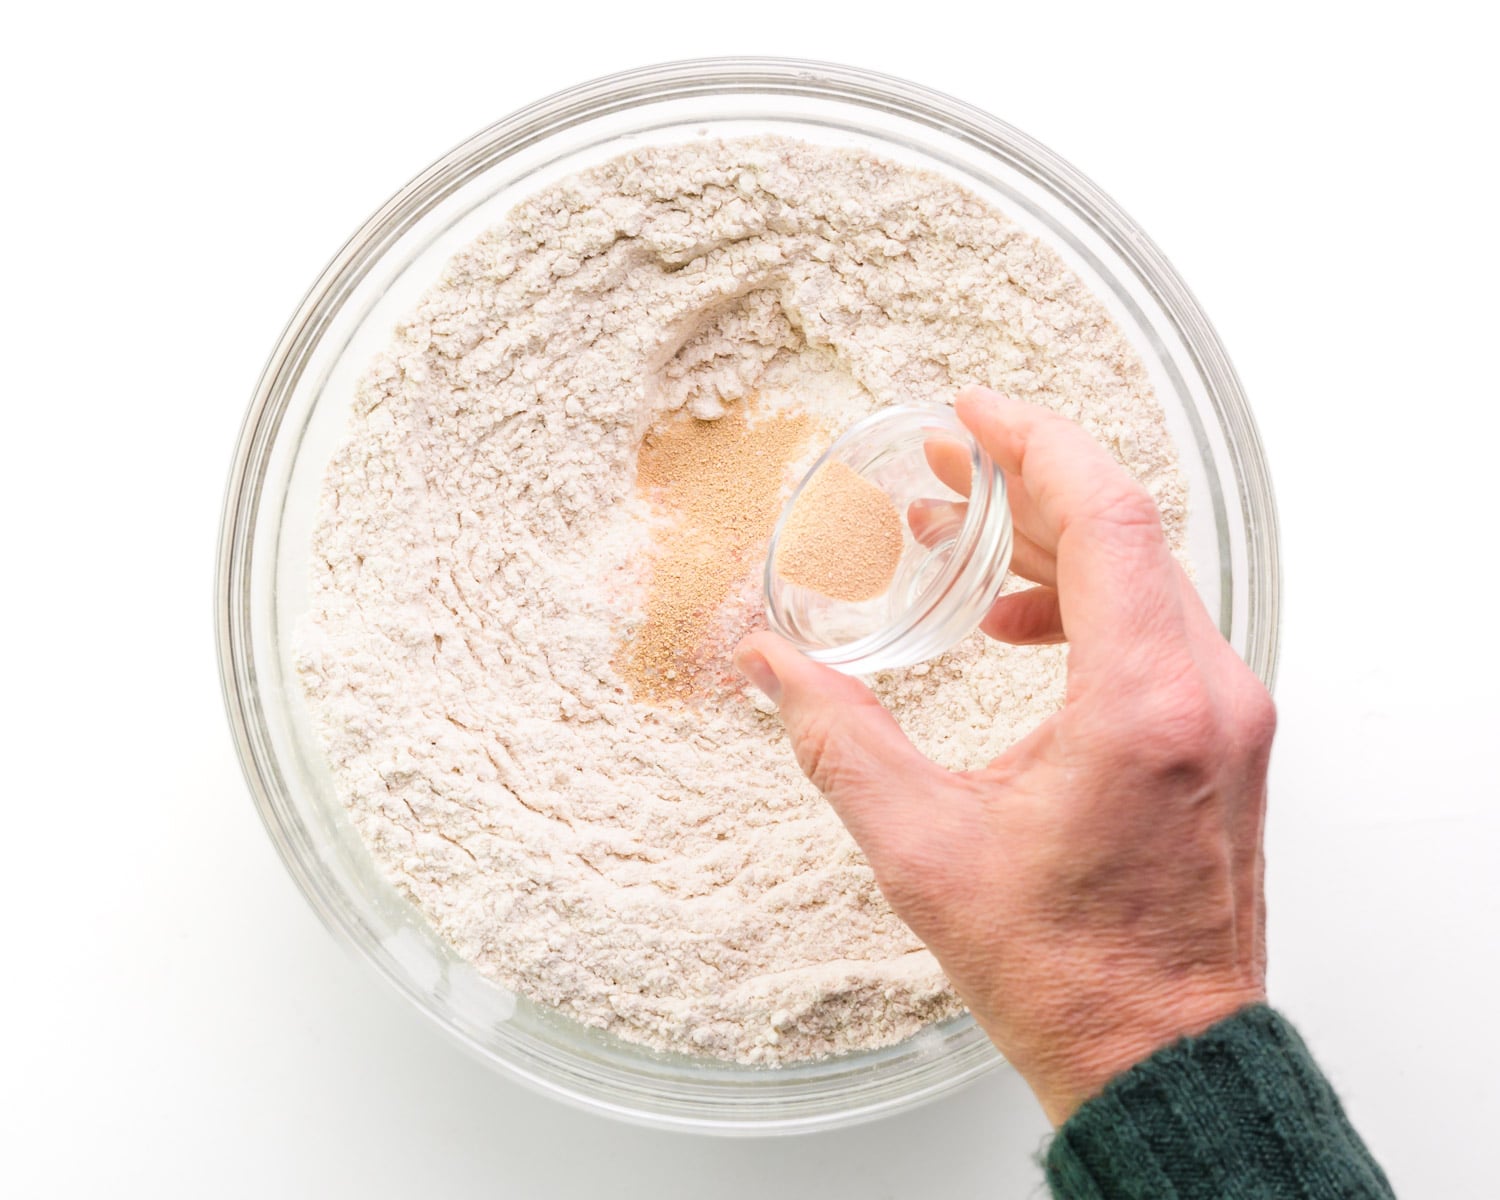 A hand holds a bowl with dry yeast, sprinkling it over a bowl of flour.